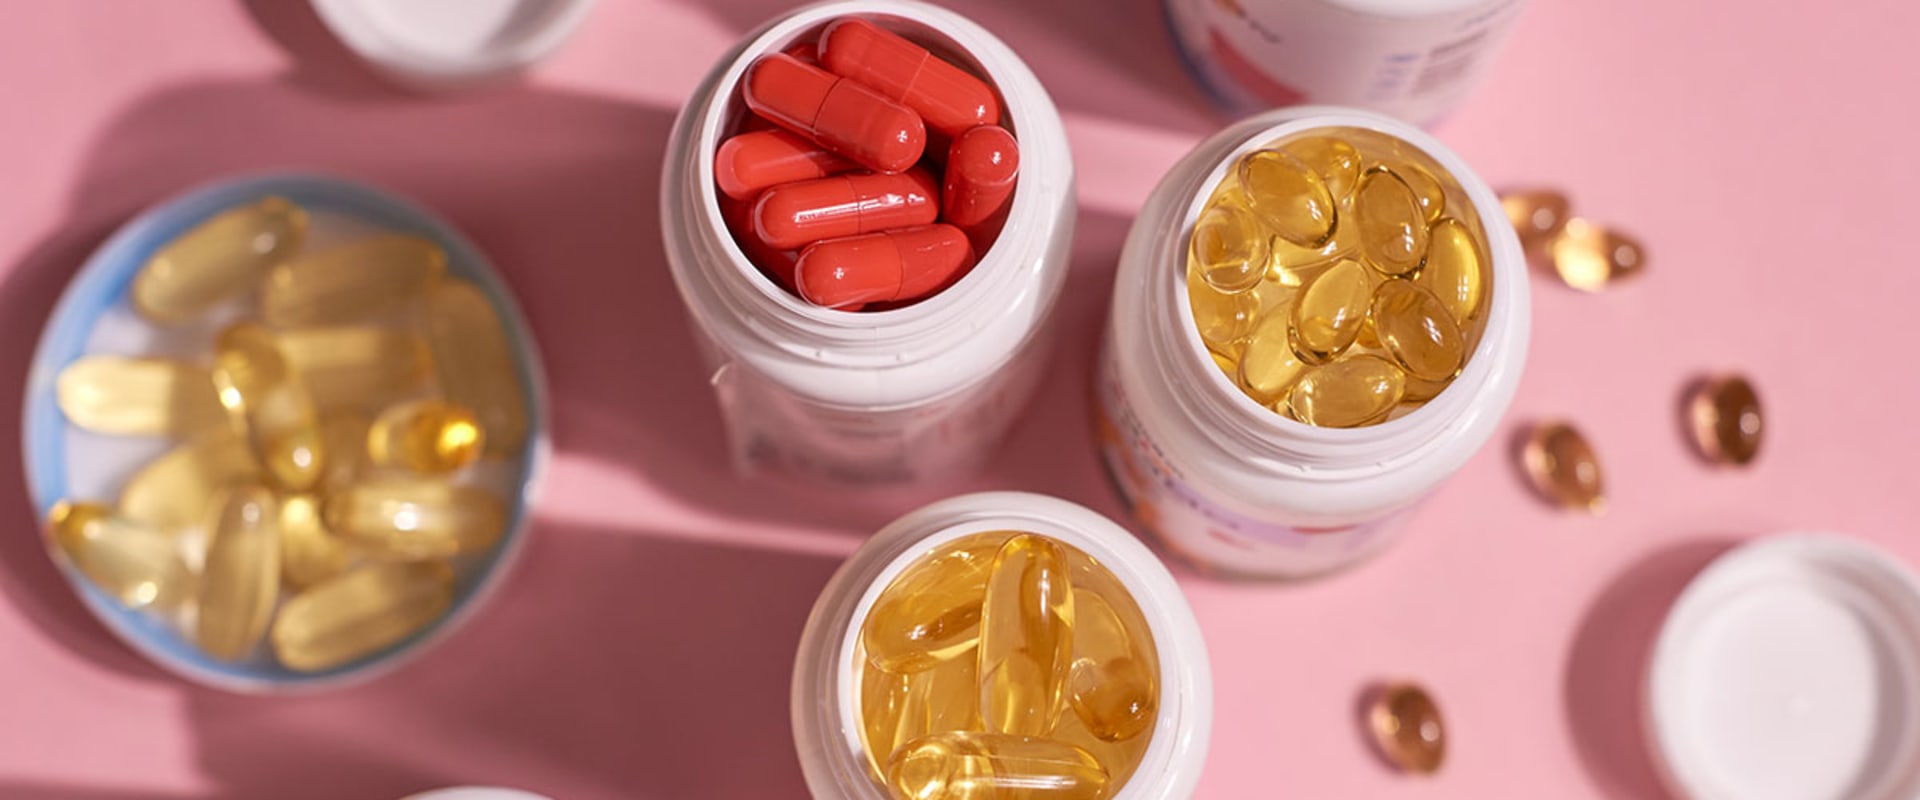 Are Anti-Aging Supplements Safe to Take? - An Expert's Perspective